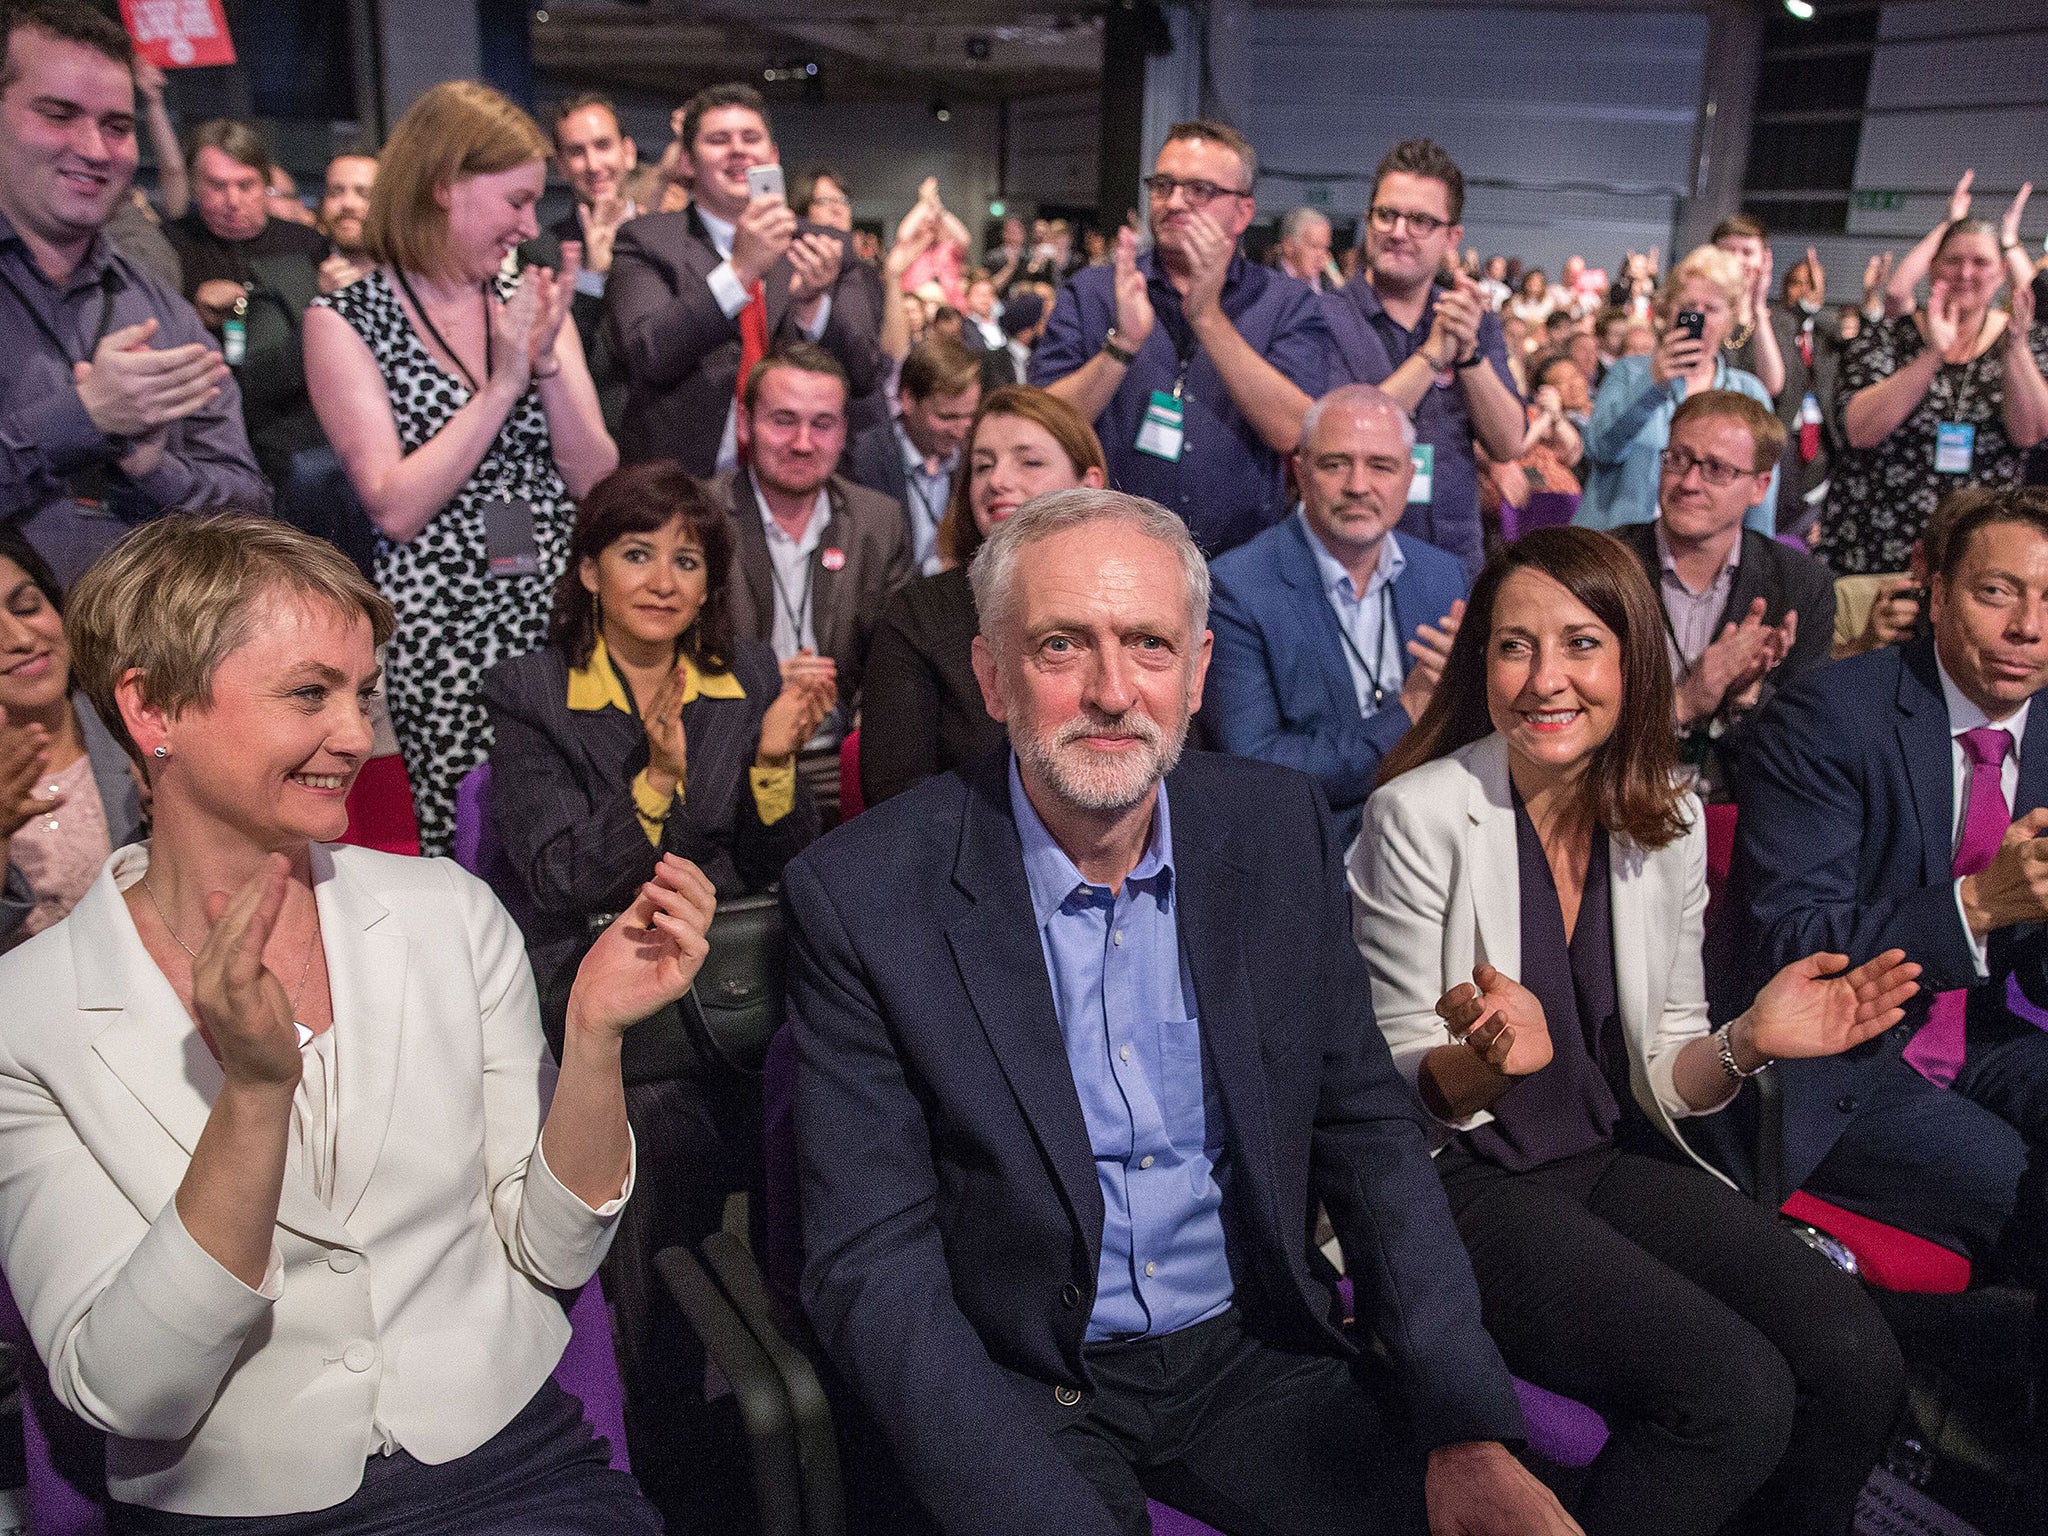 Jeremy Corbyn, the moment his win was announced at the Labour leadership contest on Saturday